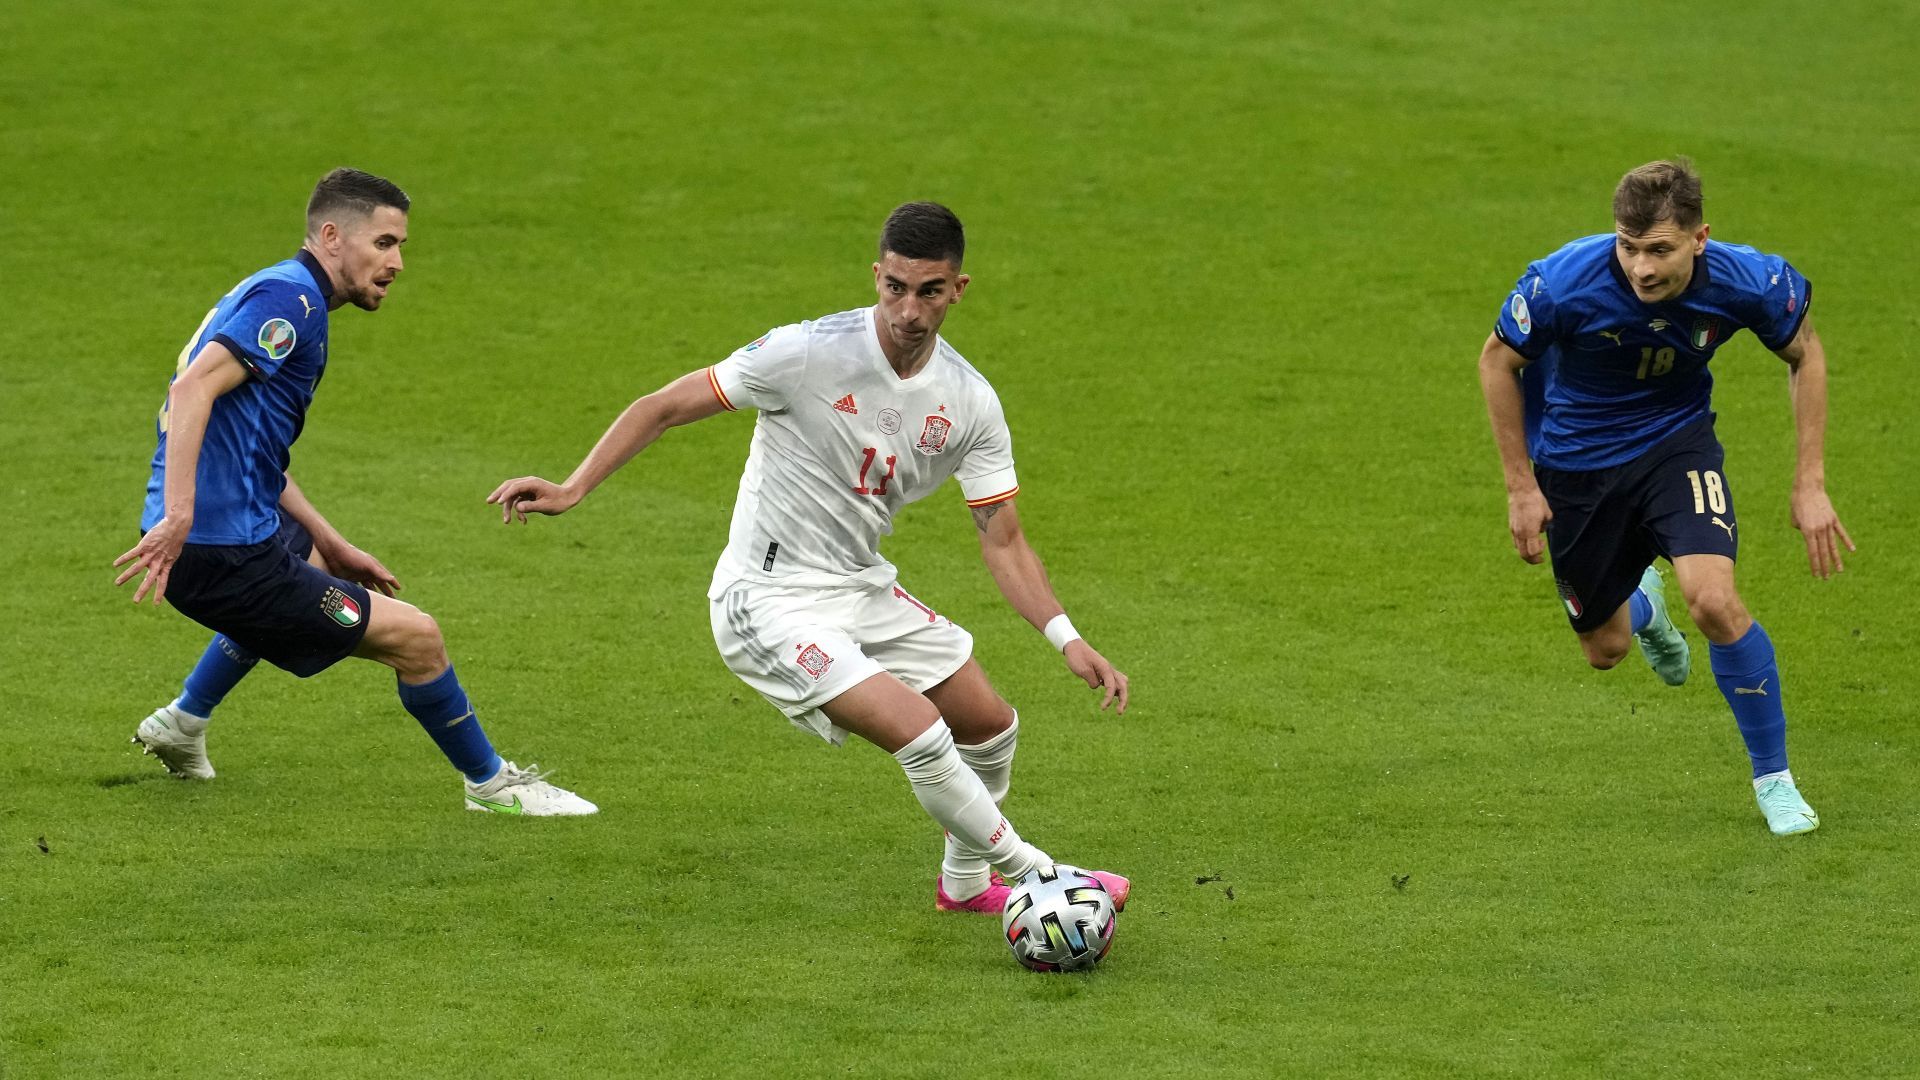 Torres in action for Spain against Italy in the Euro 2020 semi-final.